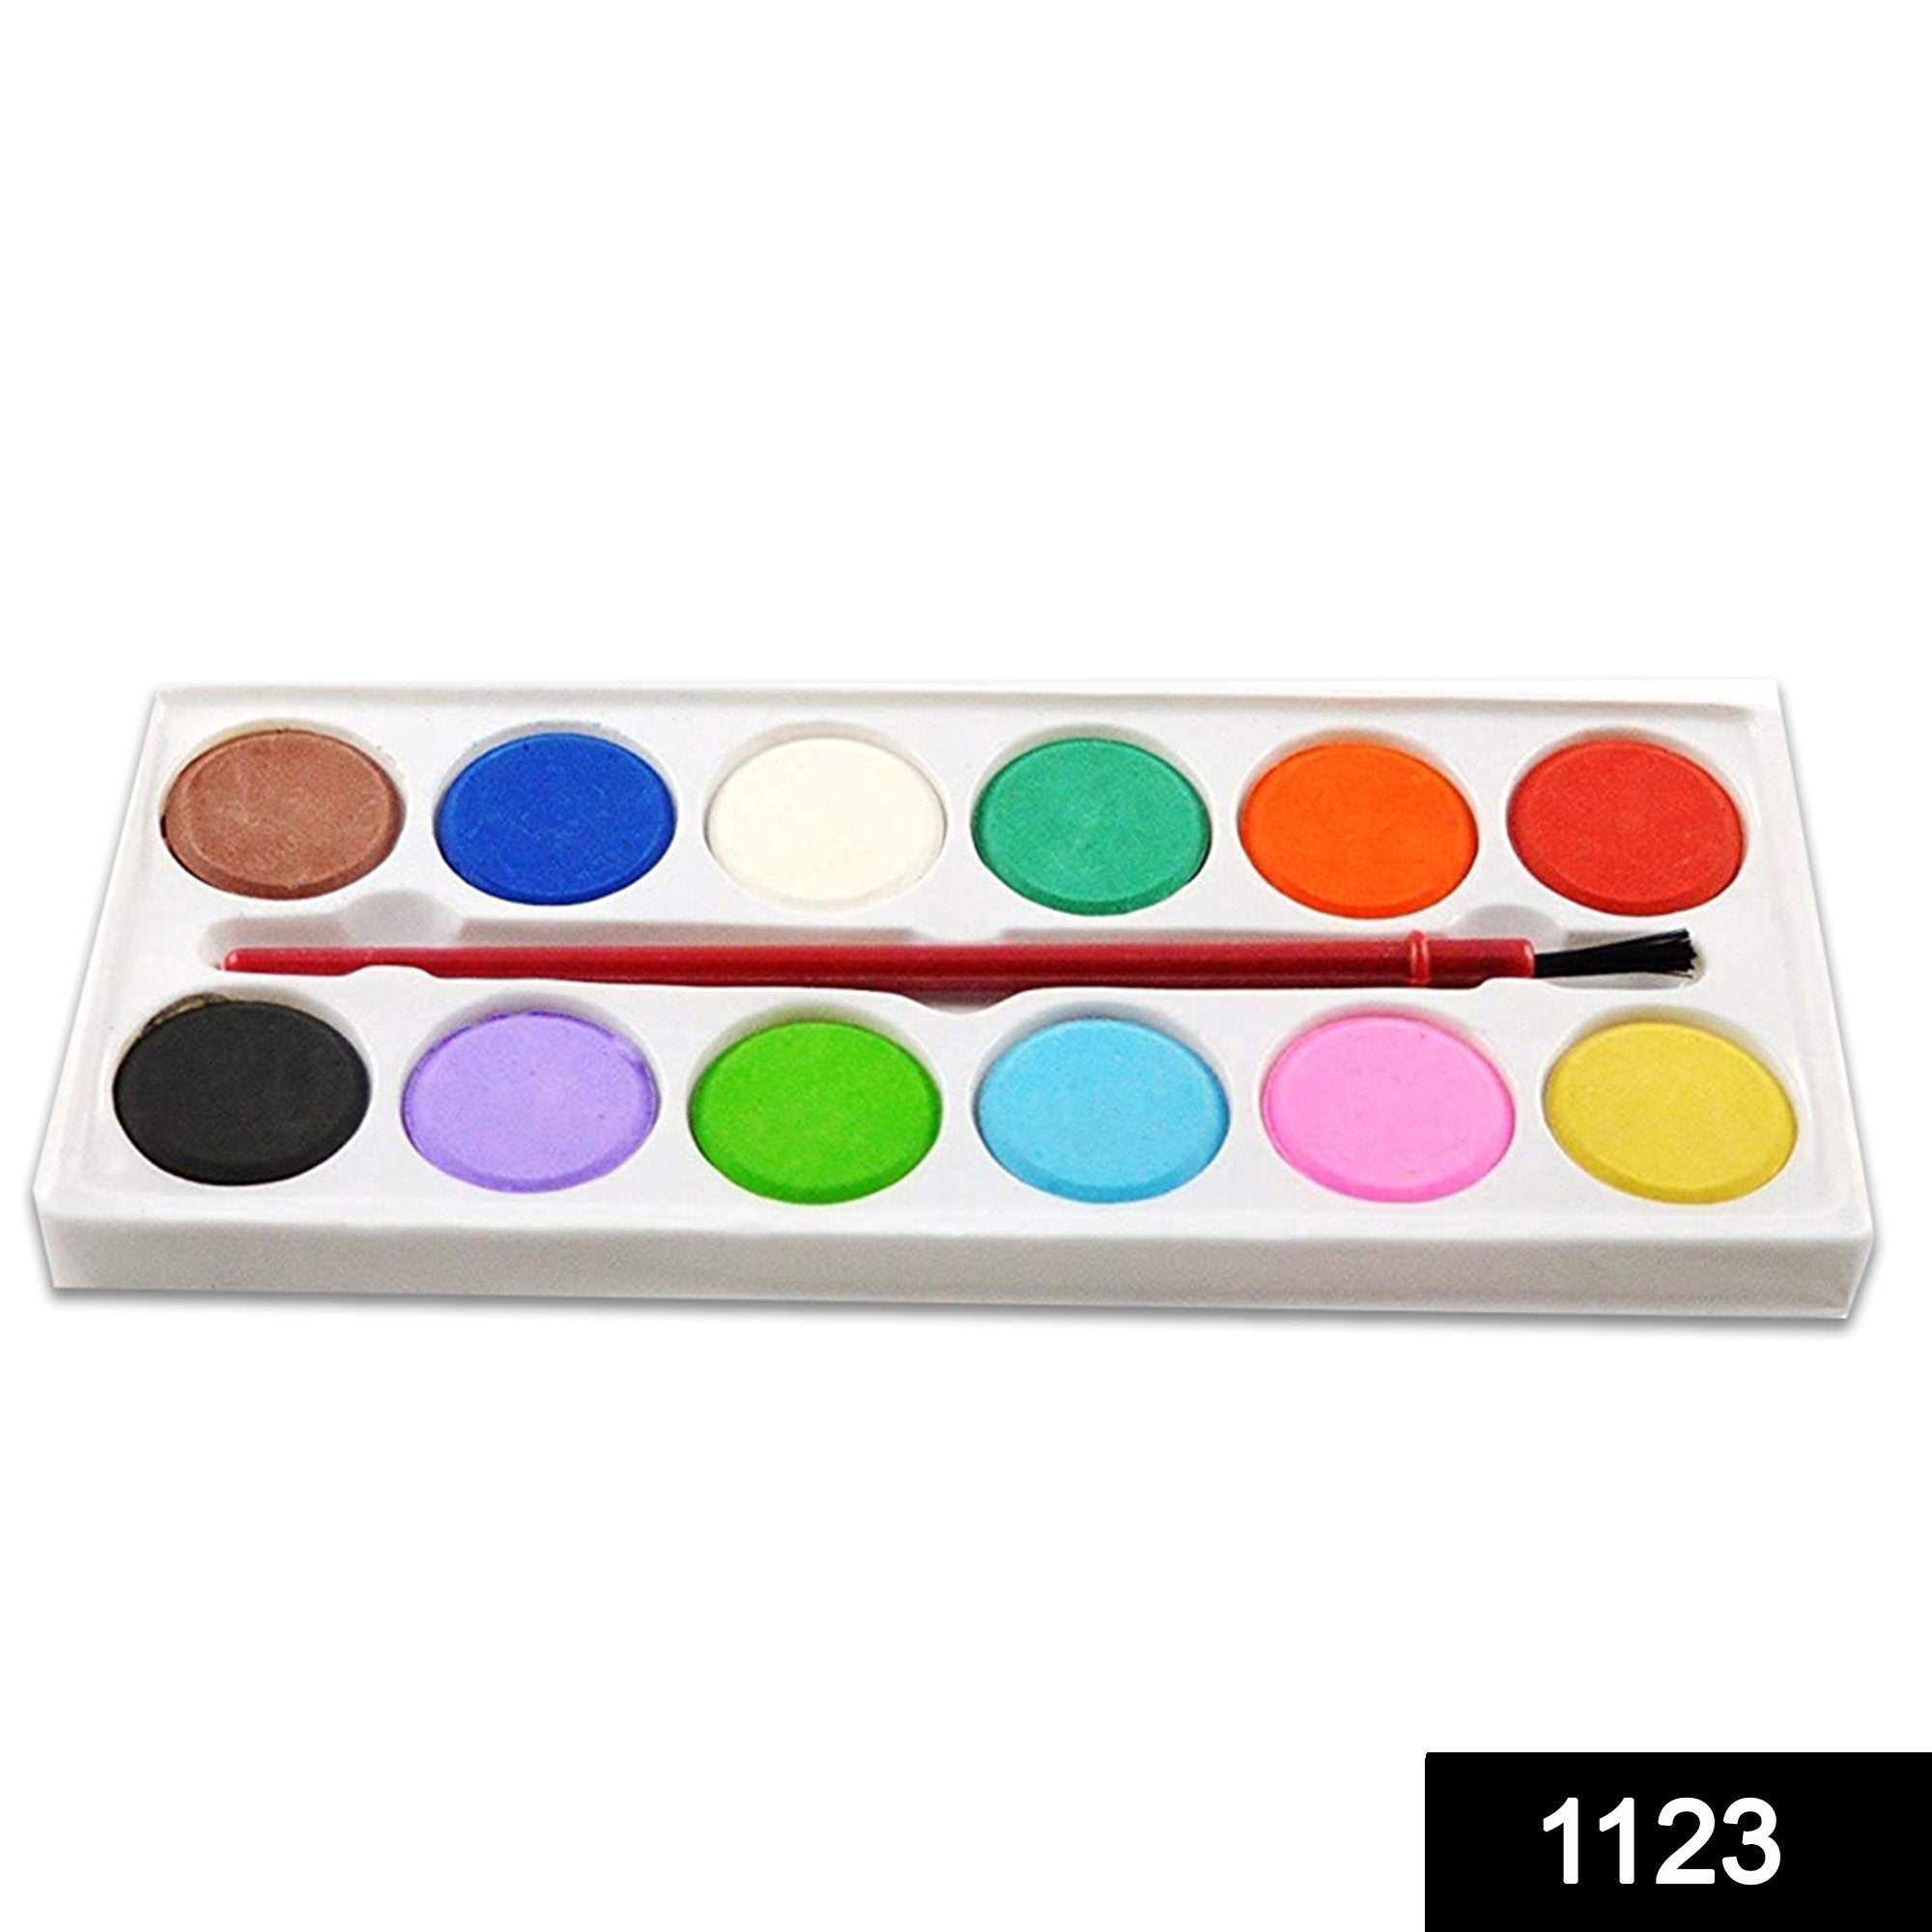 1123 Painting Water Color Kit - 12 Shades and Paint Brush (13 Pcs) - SkyShopy